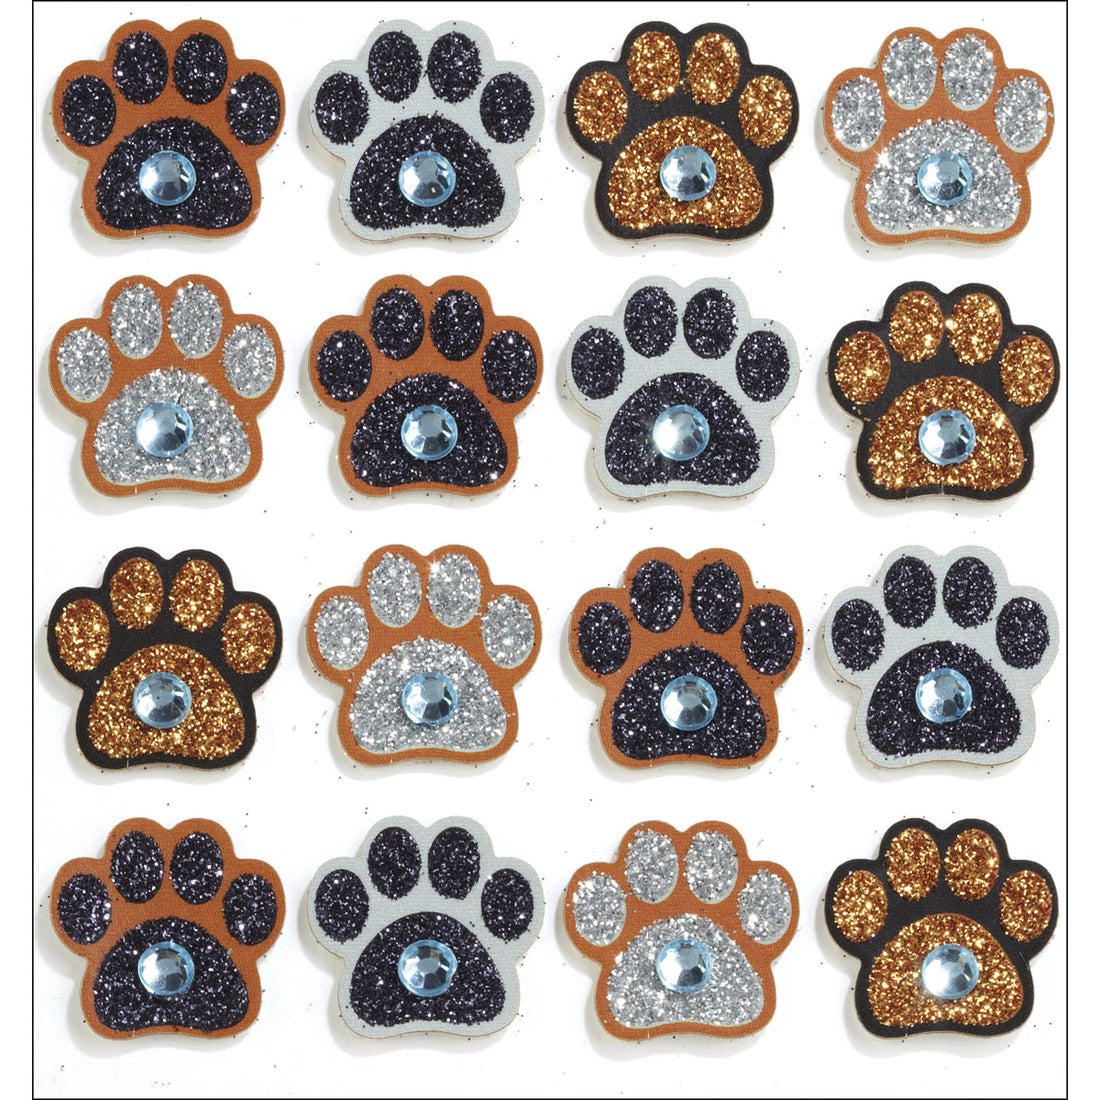 Jolee’s Boutique PAW PRINT REPEAT Dimensional Stickers 16pc